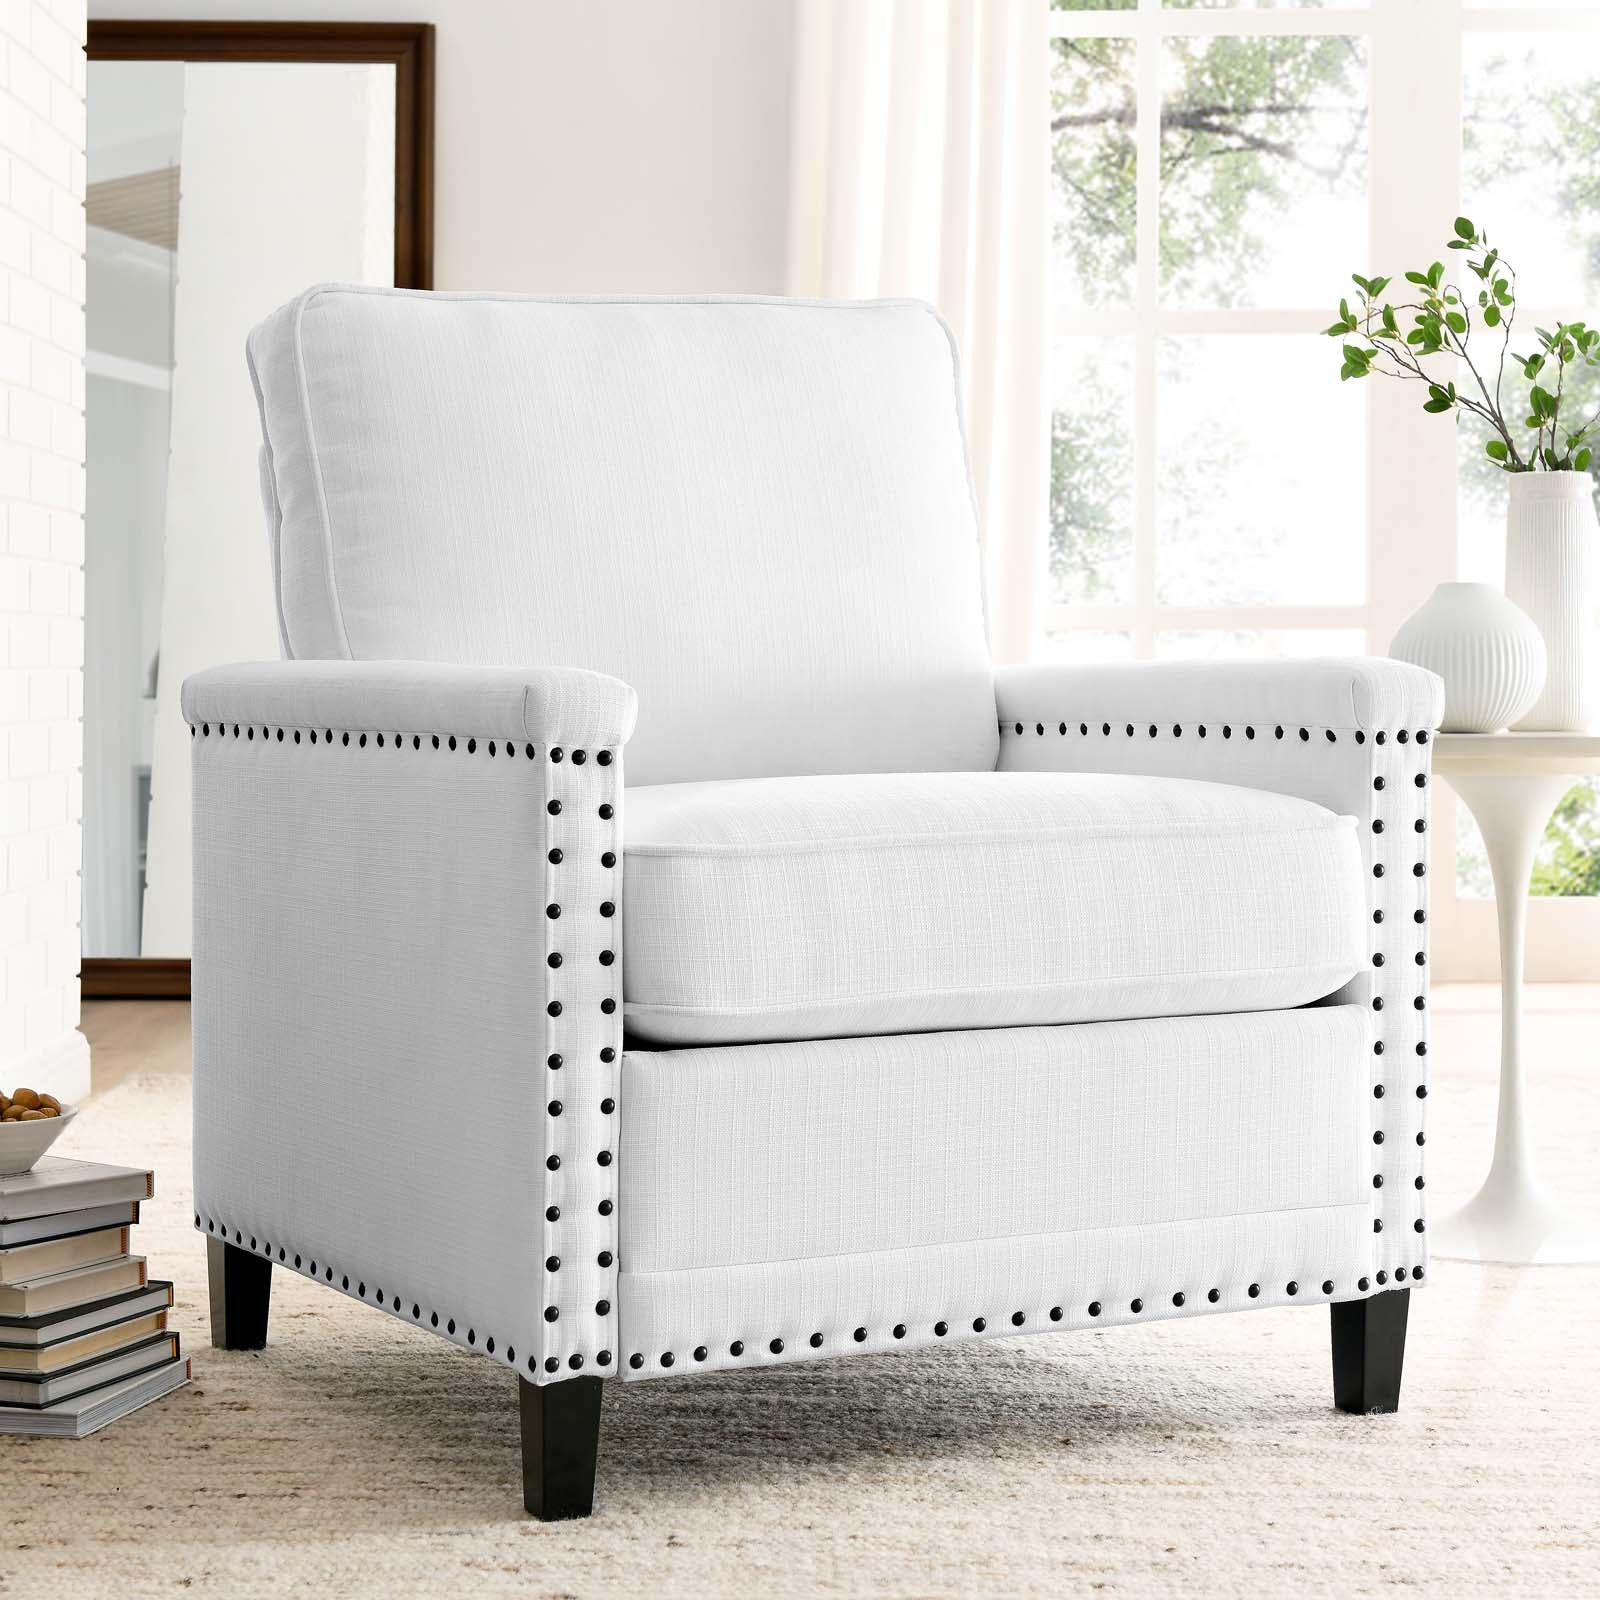 Modway Accent Chairs - Ashton Upholstered Fabric Armchair White